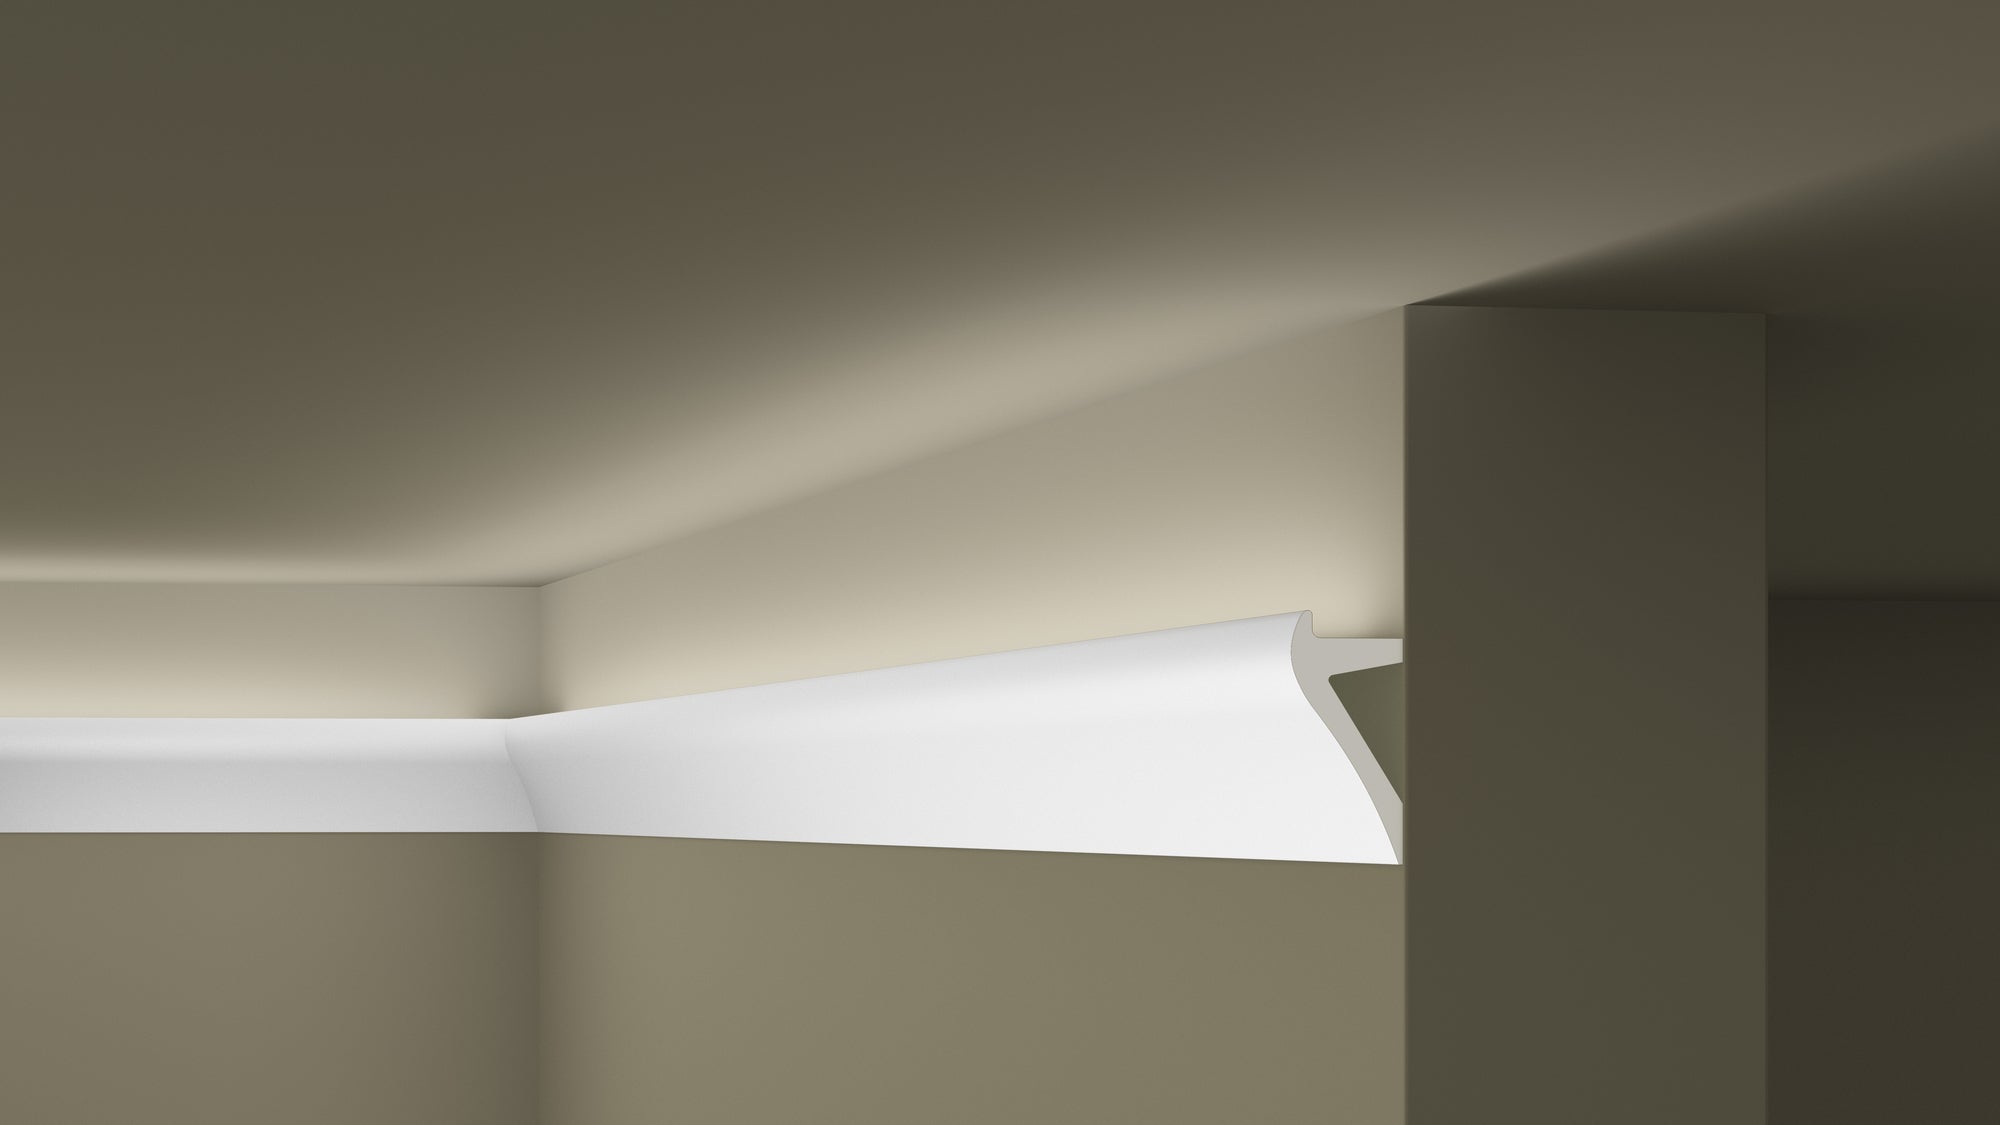 IL2 ARSTYL 2M COVING LIGHTING SOLUTION - Covings | DecorMania